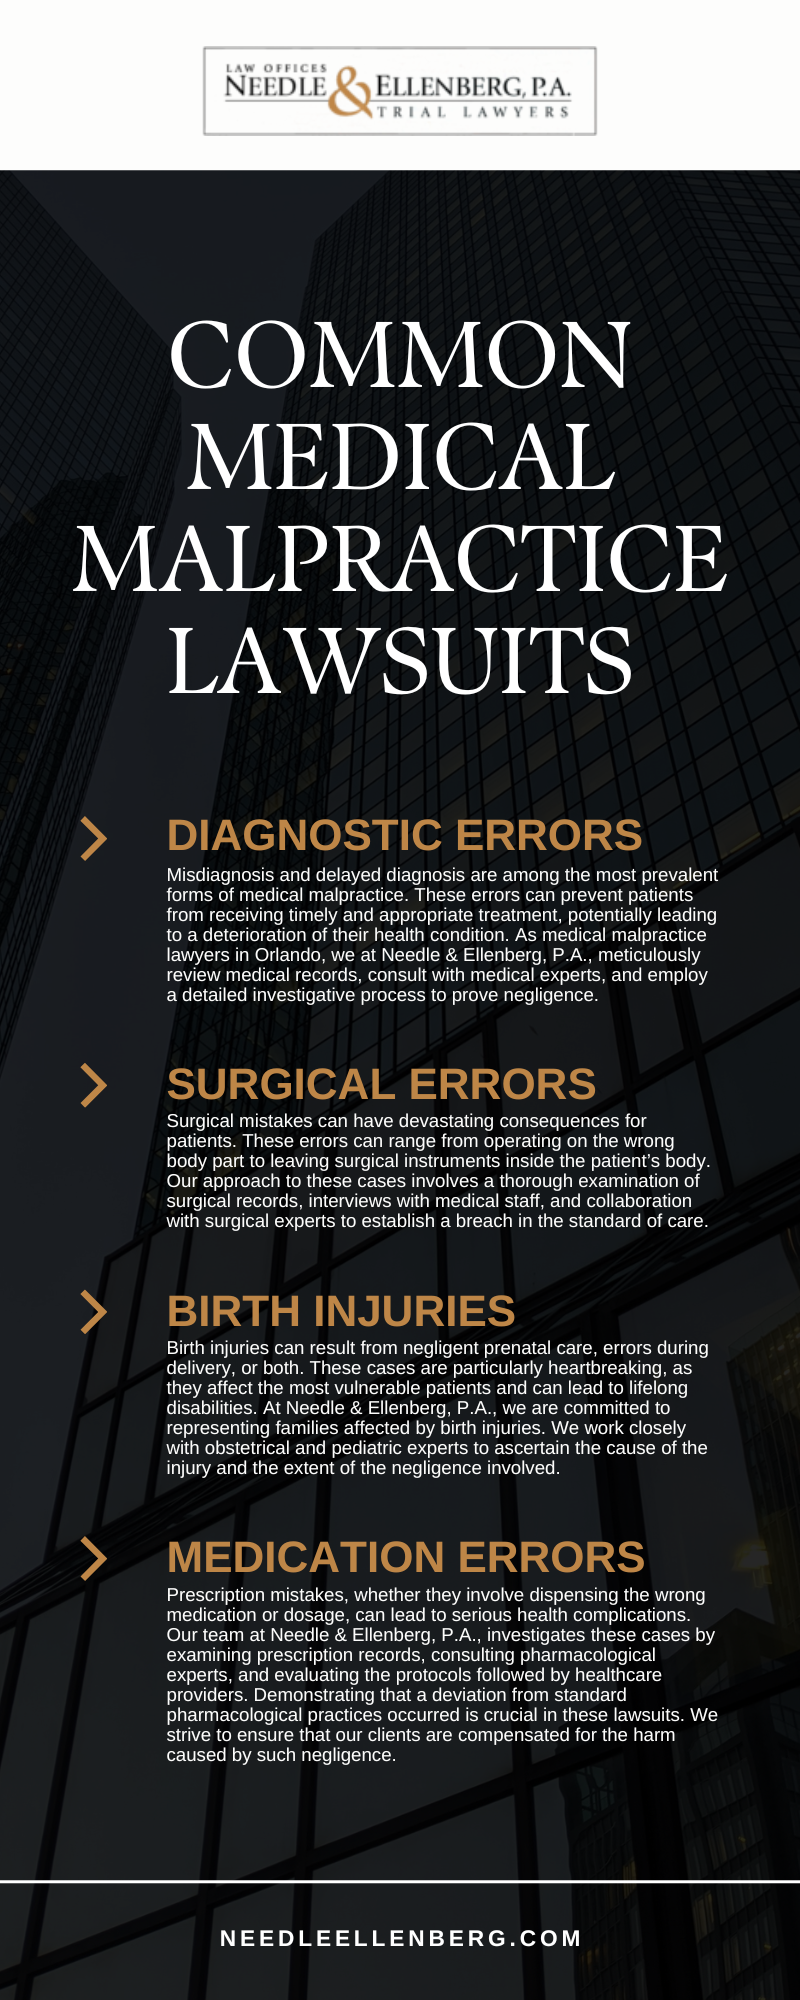 Common Medical Malpractice Lawsuits Infographic